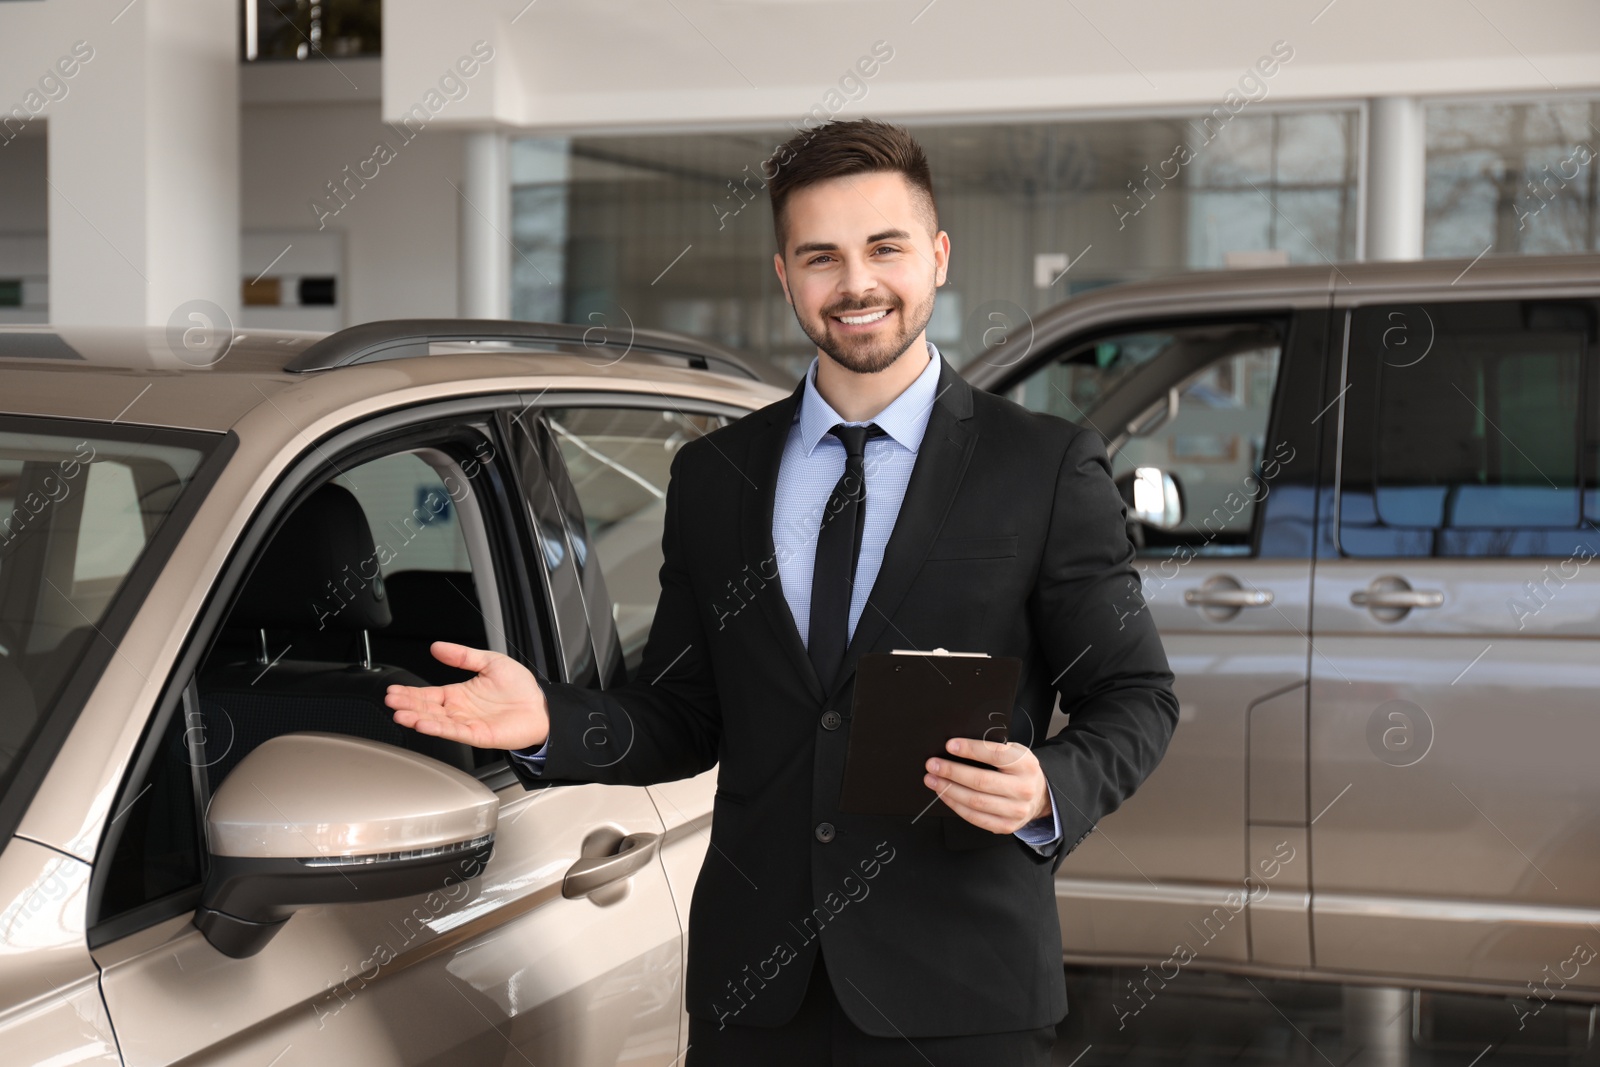 Photo of Salesman with clipboard near car in dealership